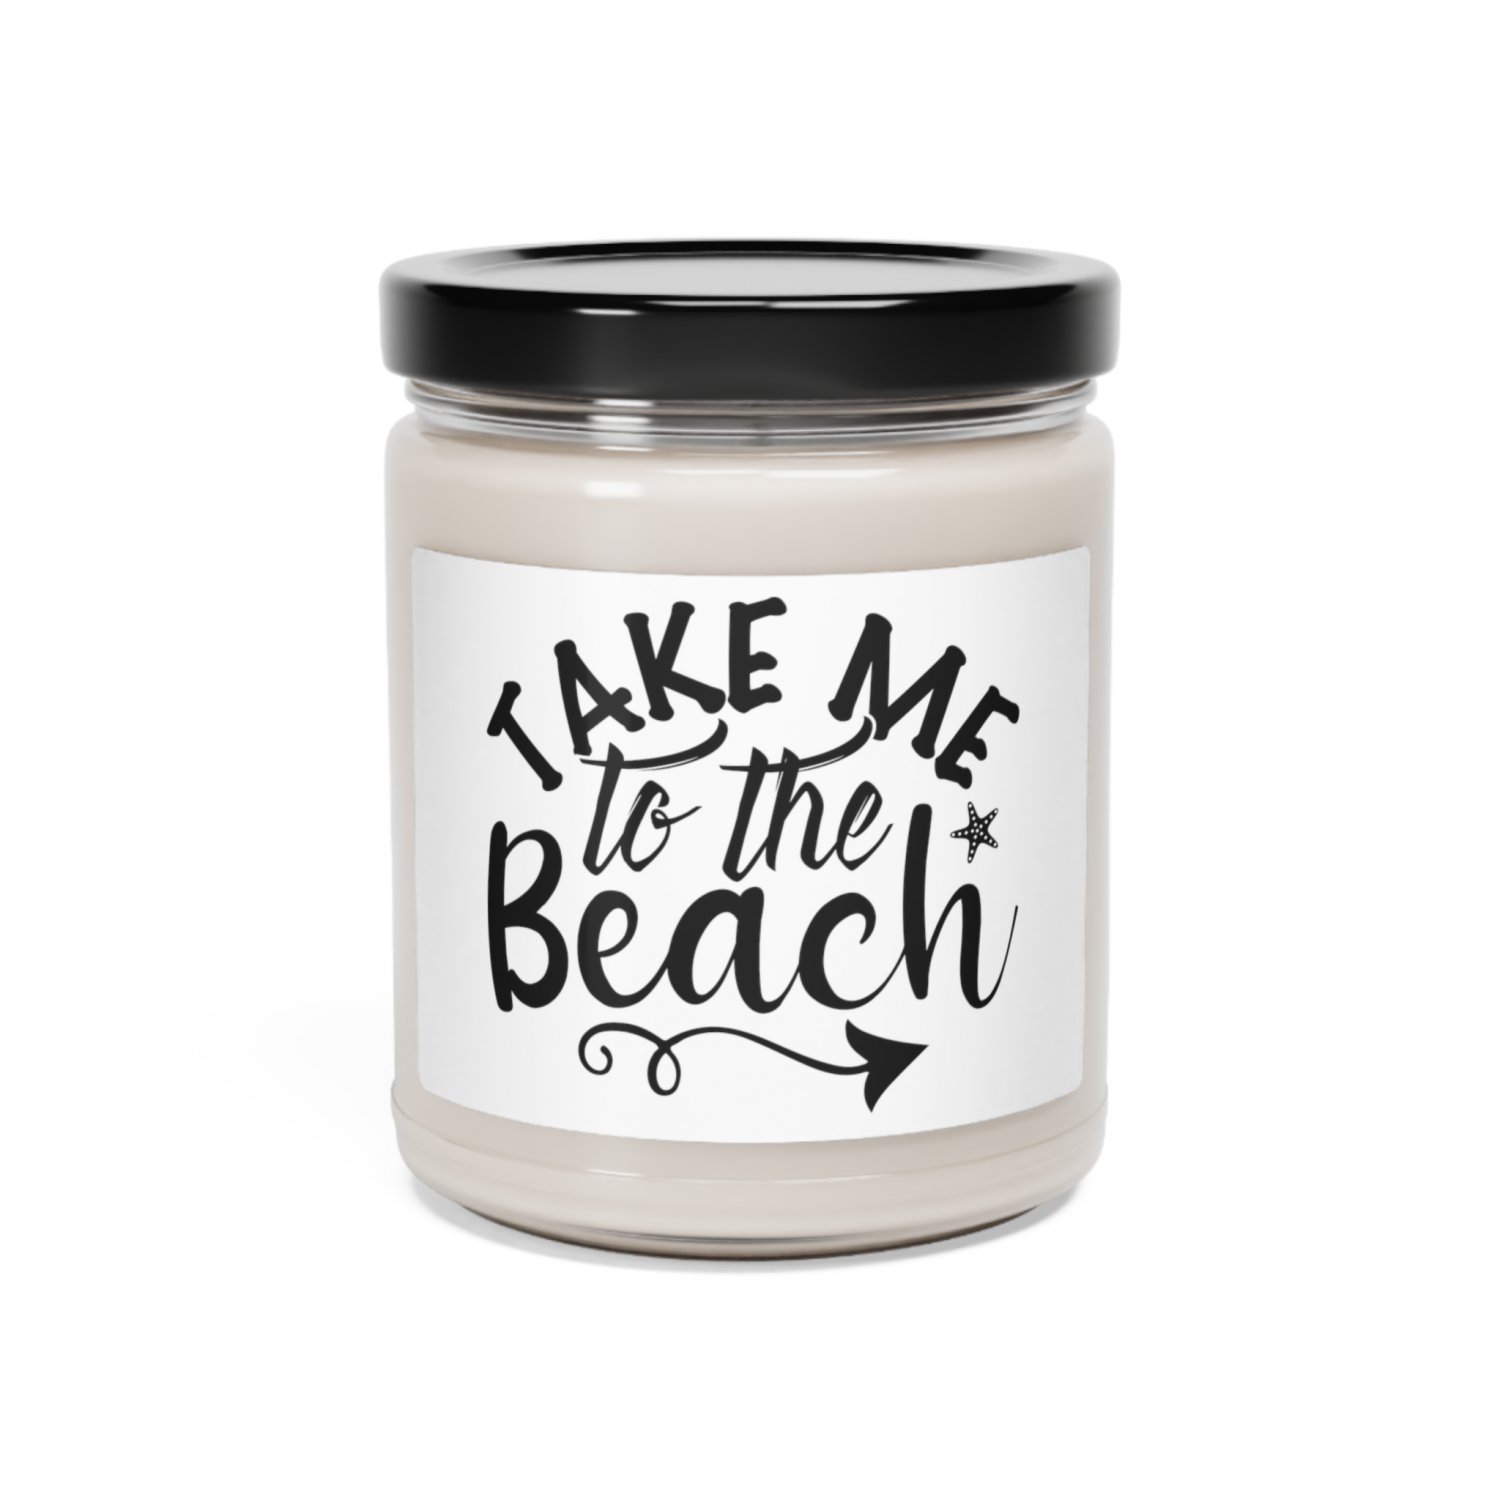 Take Me To The Beach, Scented Soy Candle, 9oz Apple Harvest